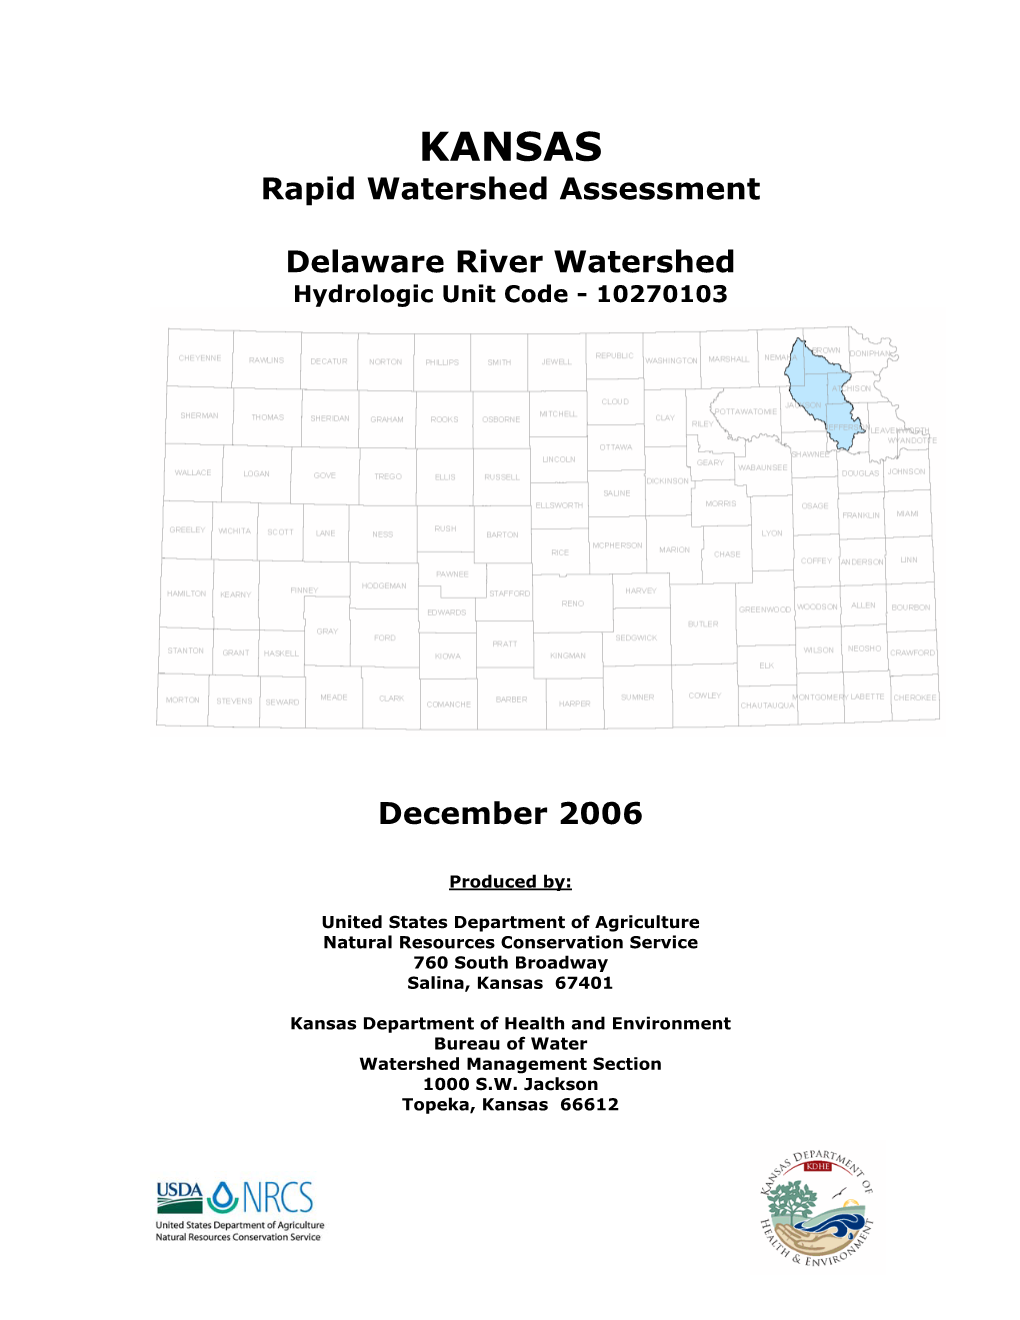 Delaware River Watershed Hydrologic Unit Code - 10270103